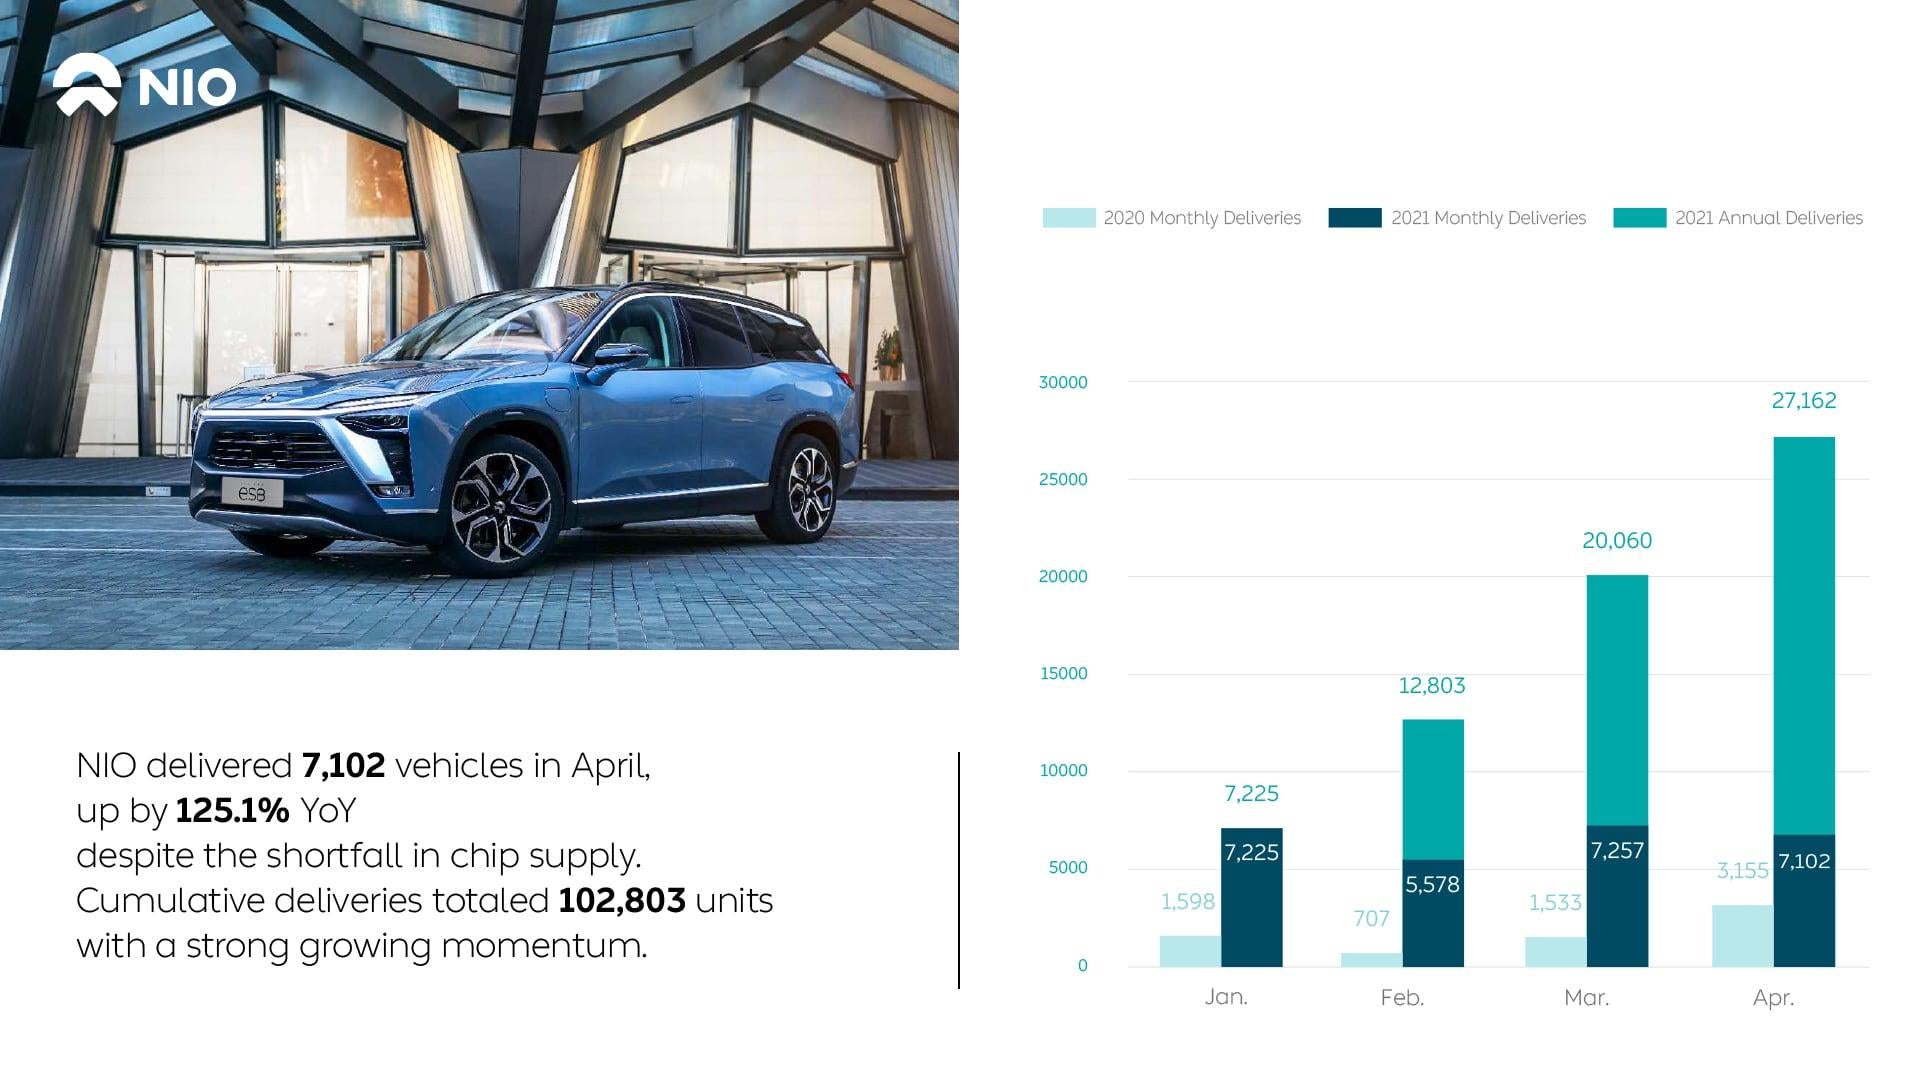 NIO Delivers 7,102 Vehicles in April and 102,803 Cumulatively NIO